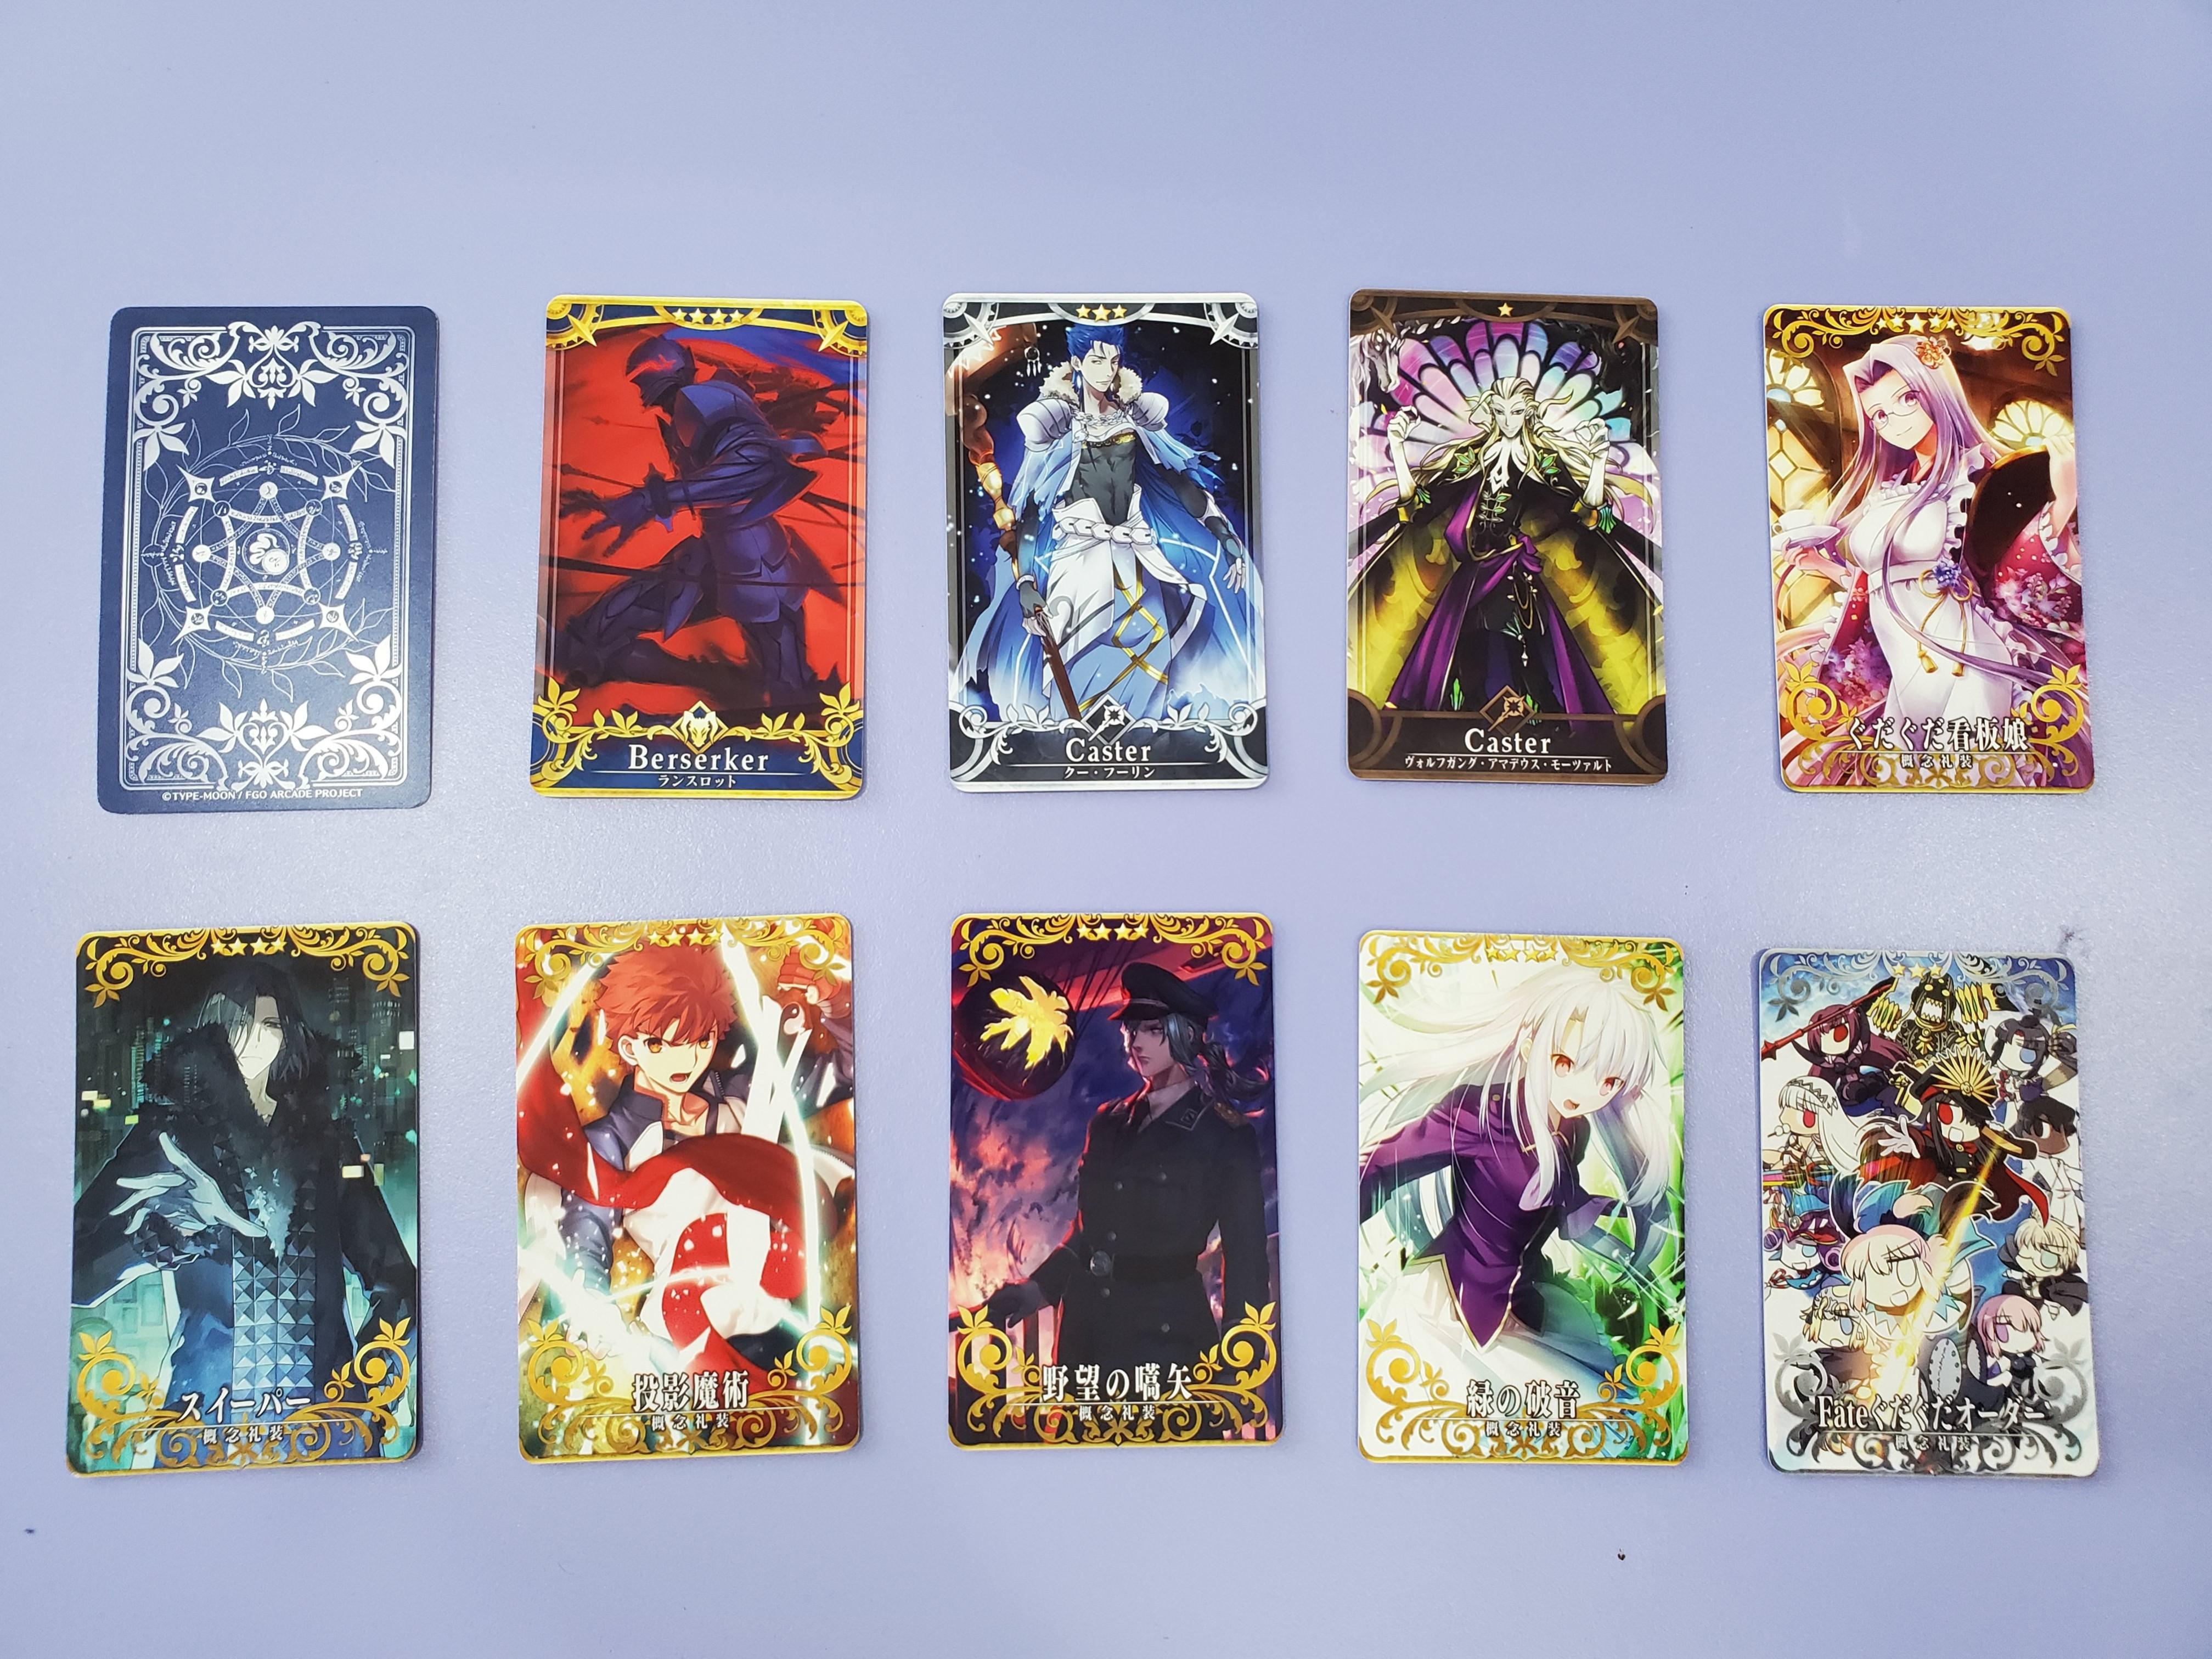 Fate Grand Order Fgo Arcade Card Set 7 Hobbies And Toys Collectibles And Memorabilia Fan 8528